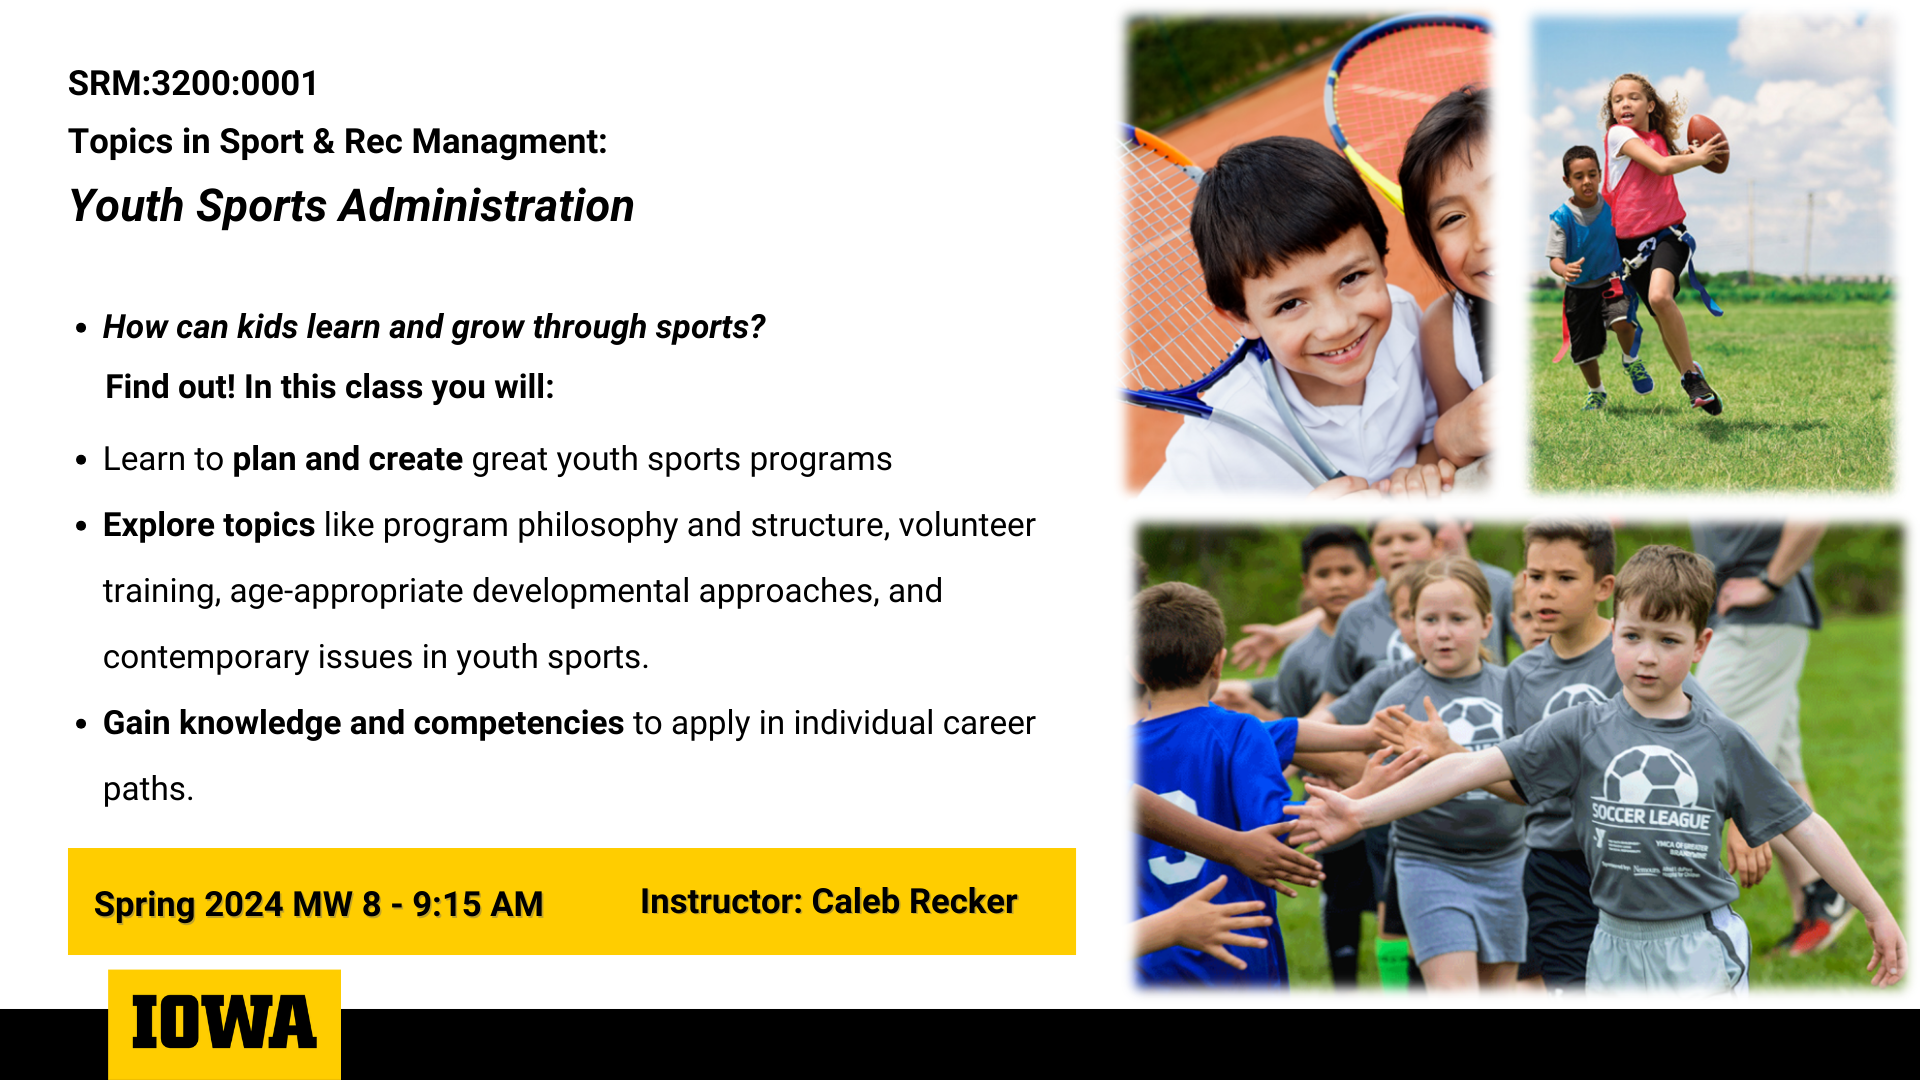 SRM:3200:0001 Topics in Sport & Rec Management: Youth Sports Administration